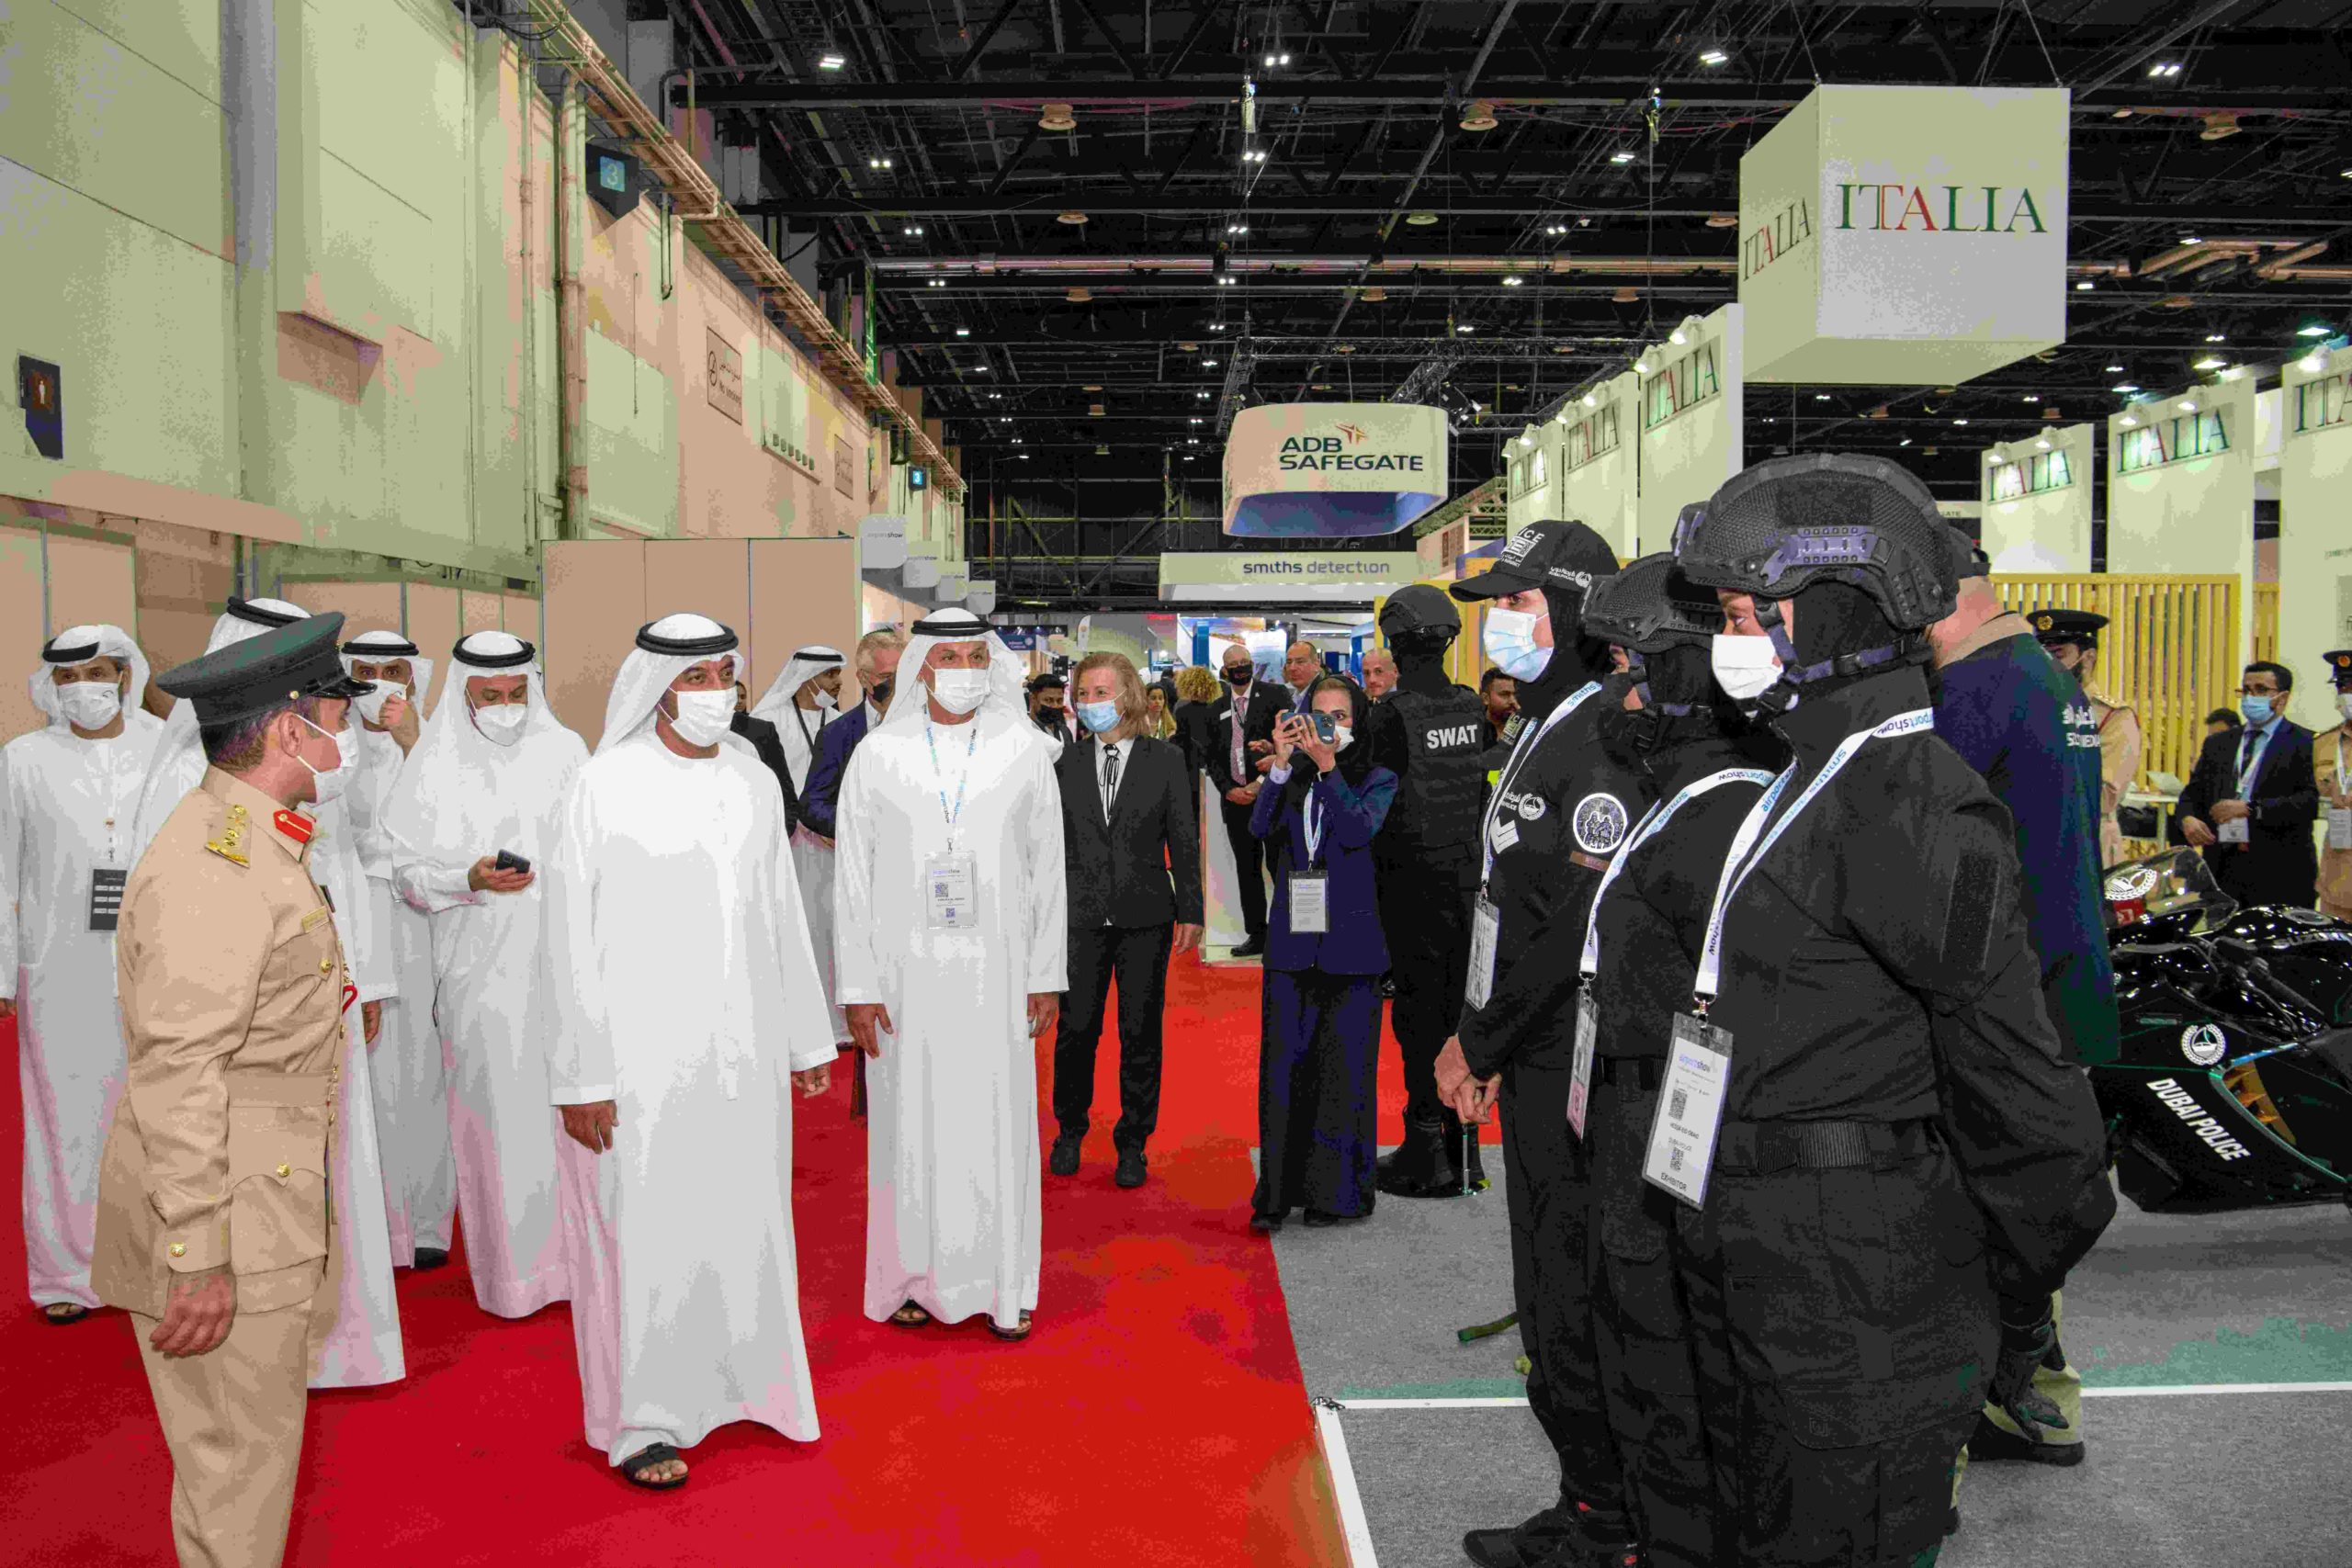 Airport Show opens in Dubai amidst clear indications of accelerated growth in aviation industry